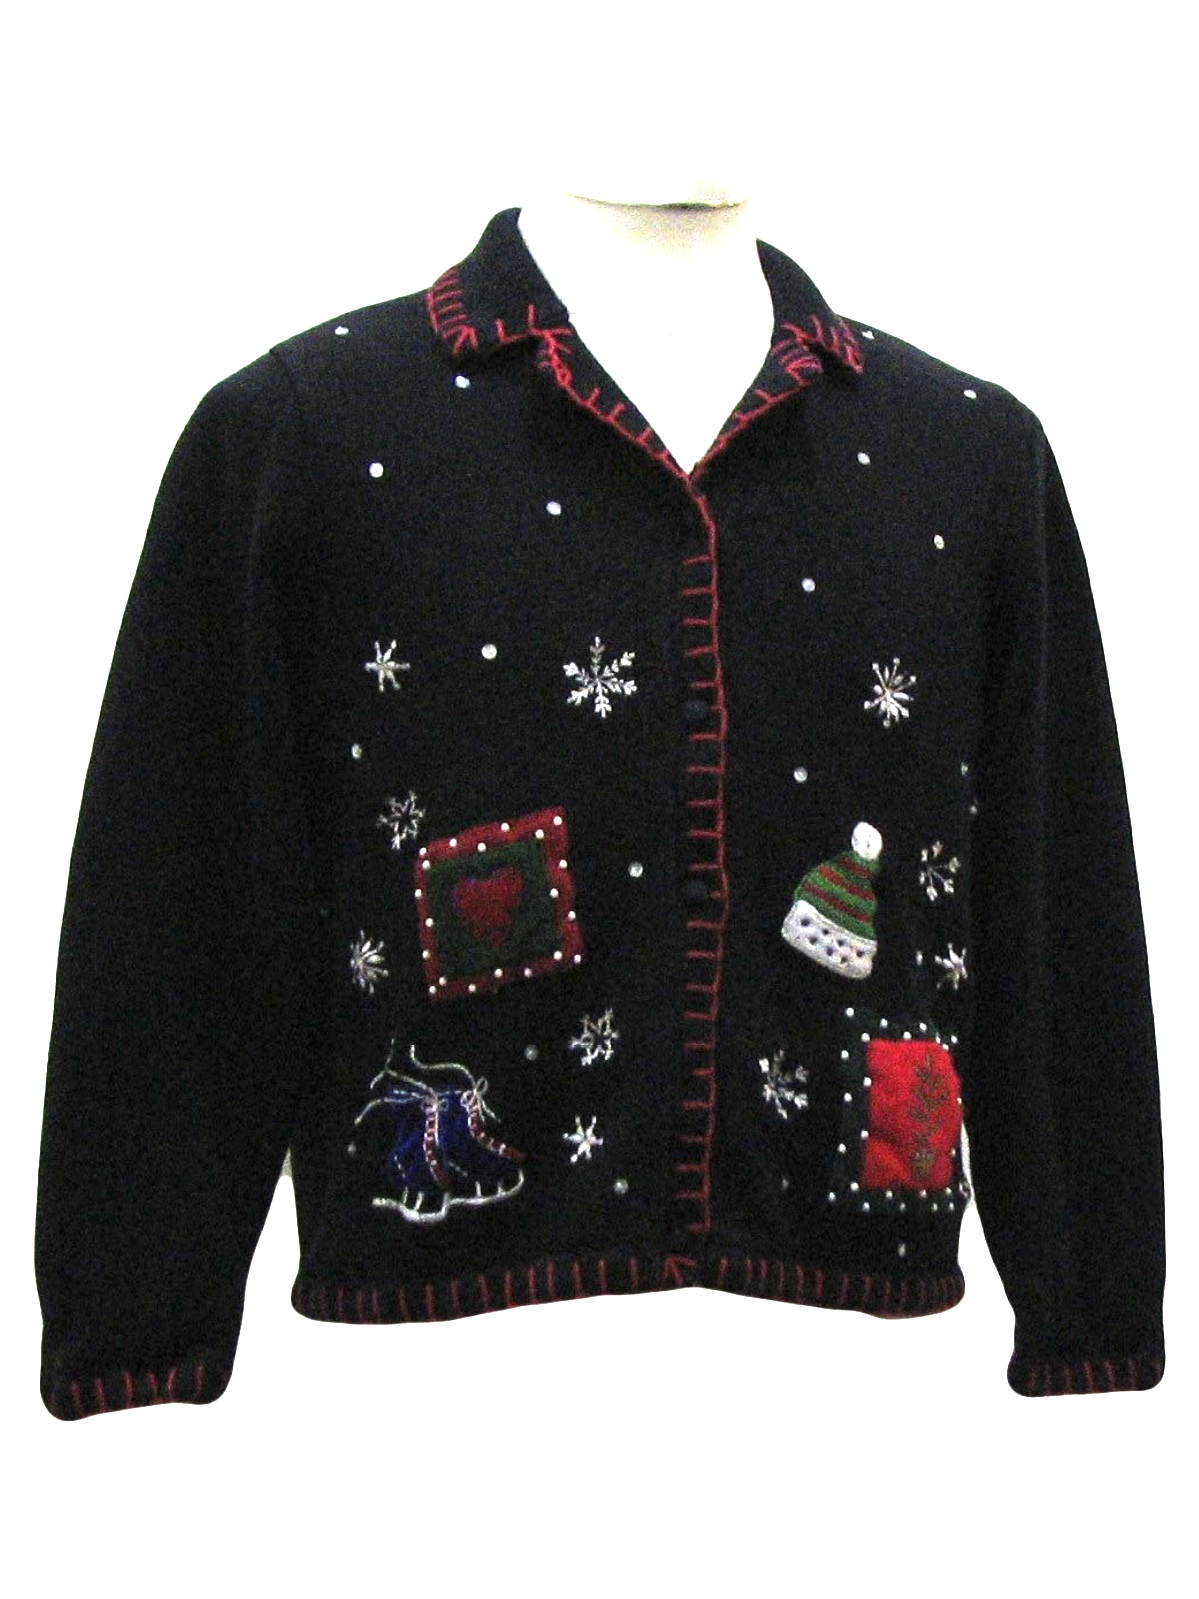 Womens Ugly Christmas Sweater : -Basic Editions- Womens Black and ...